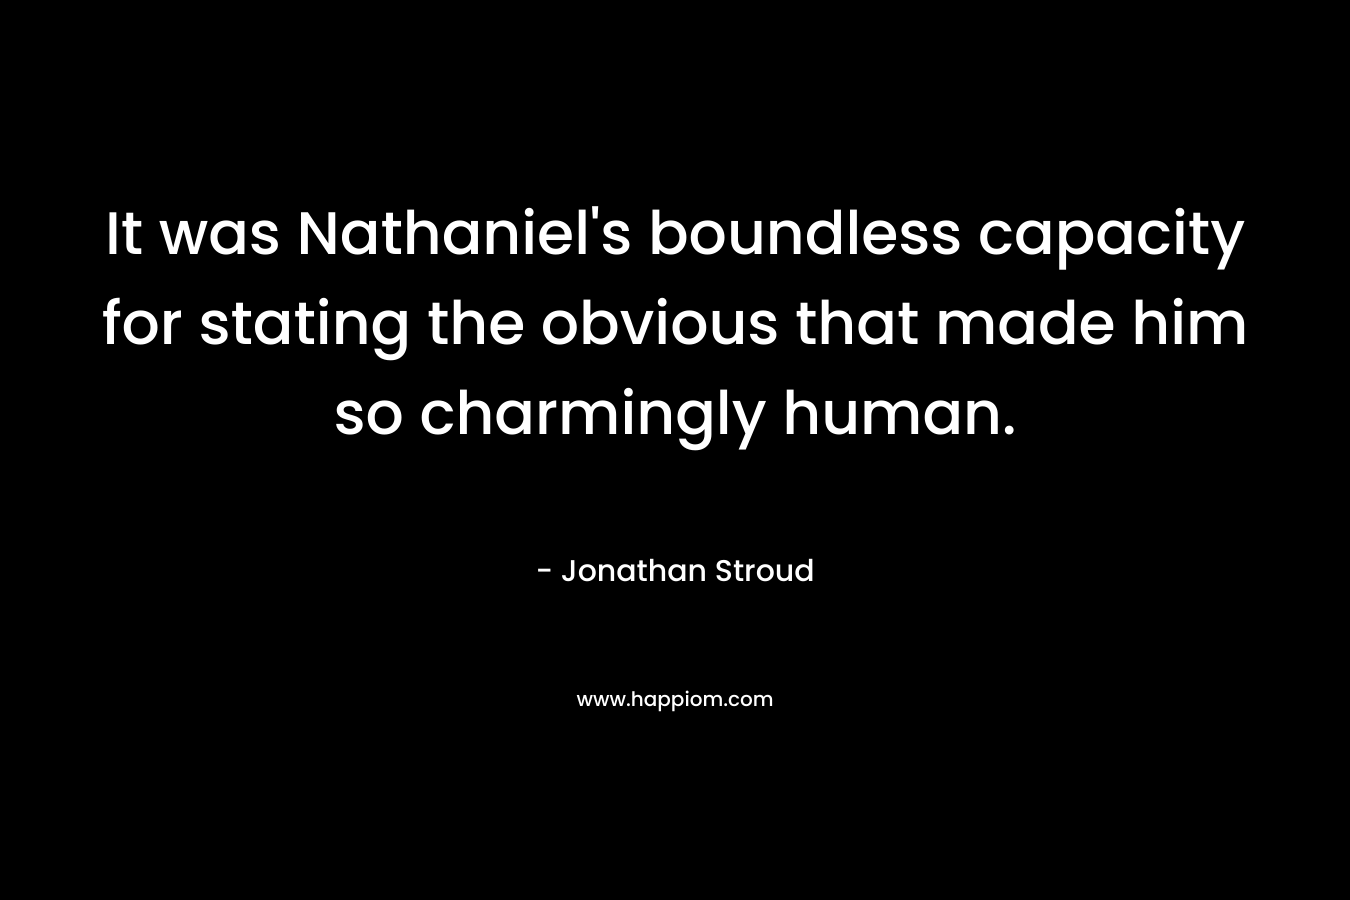 It was Nathaniel’s boundless capacity for stating the obvious that made him so charmingly human. – Jonathan Stroud